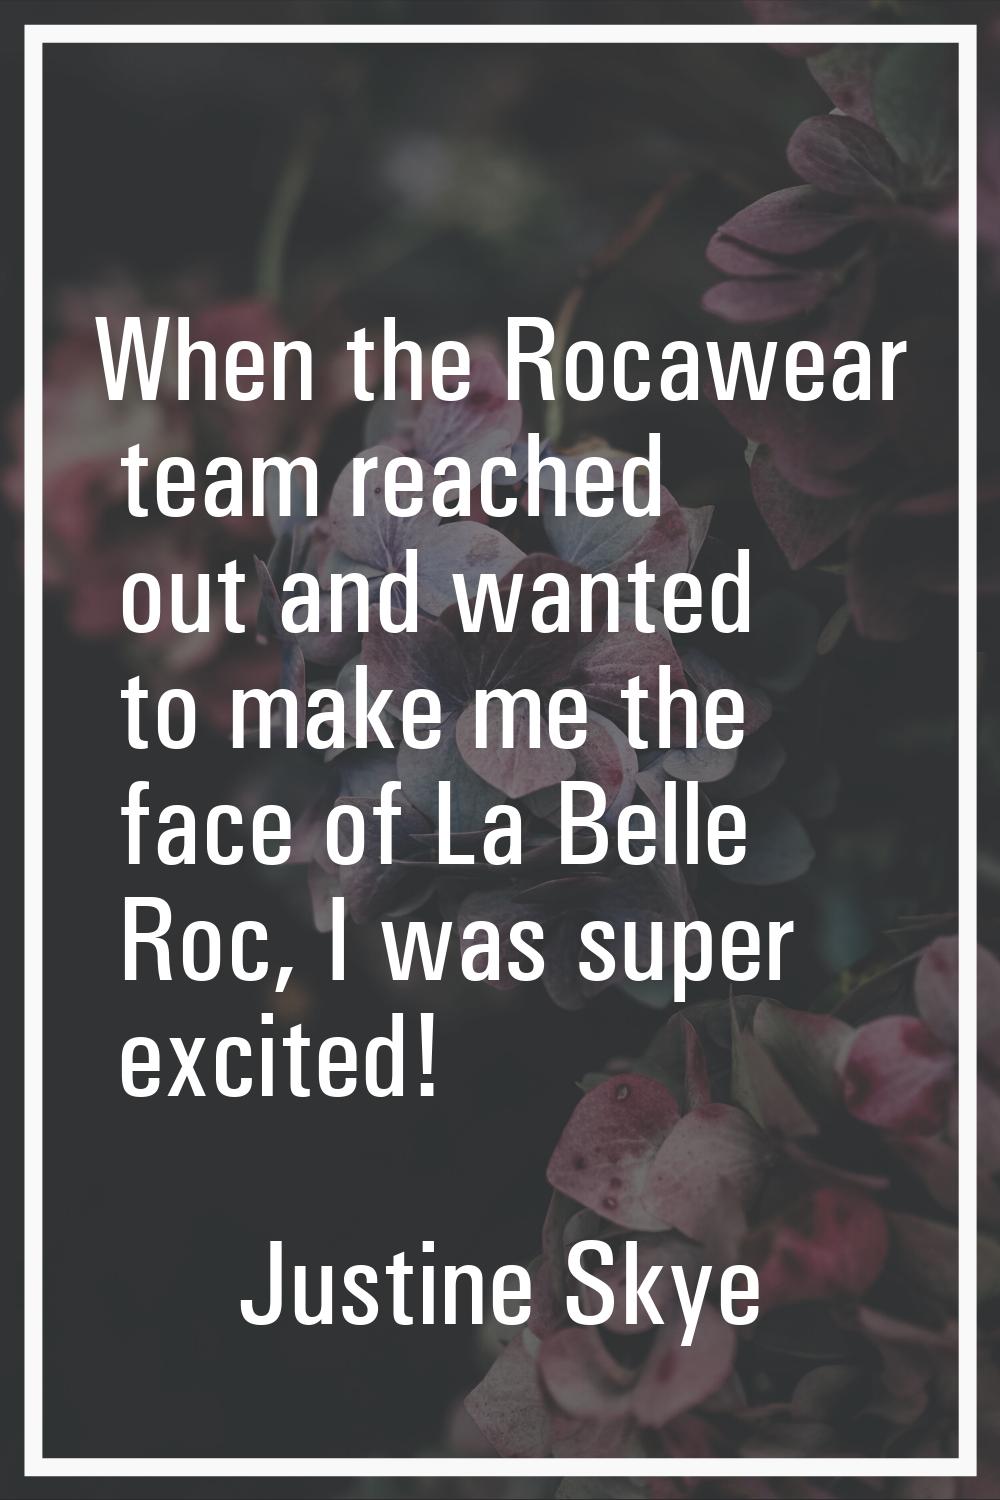 When the Rocawear team reached out and wanted to make me the face of La Belle Roc, I was super exci